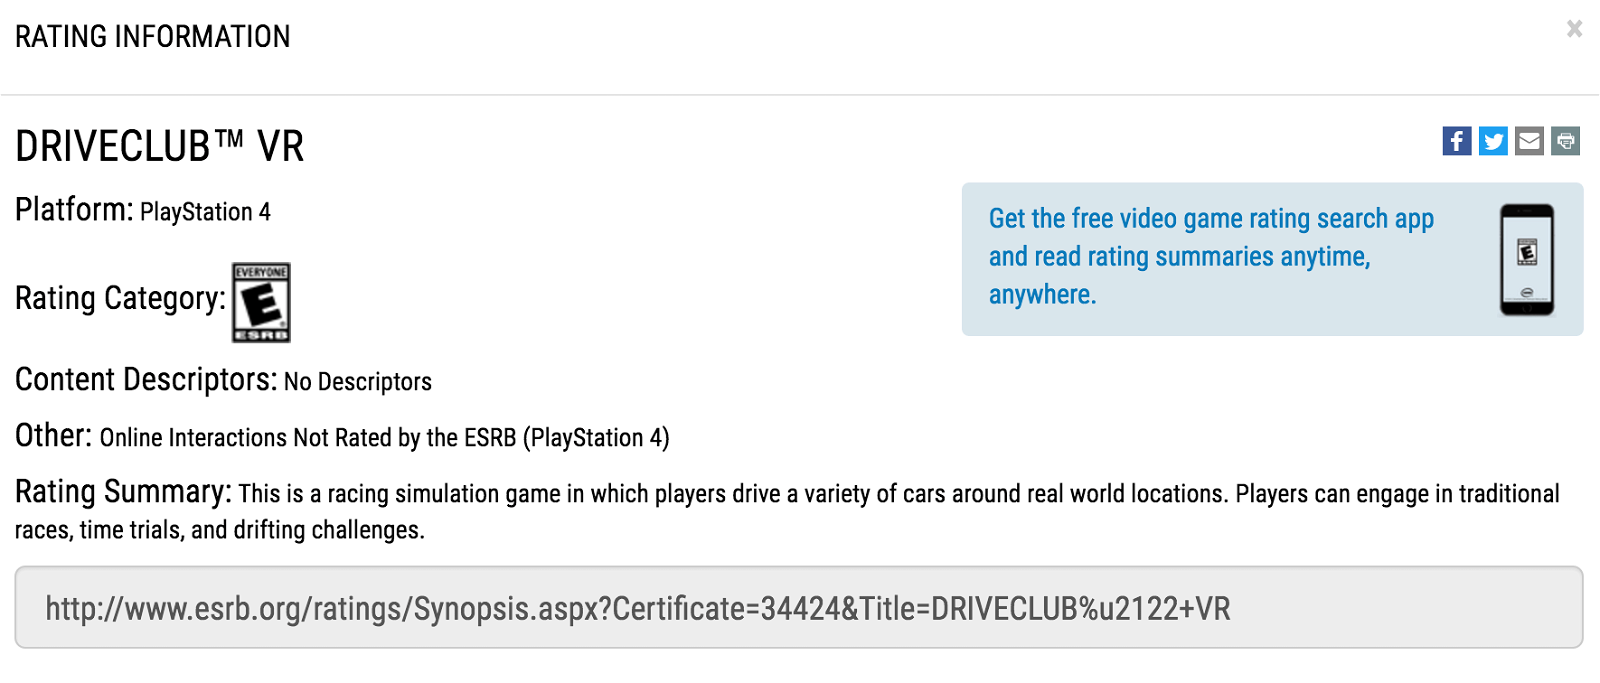 Driveclub Vr Rated By Esrb